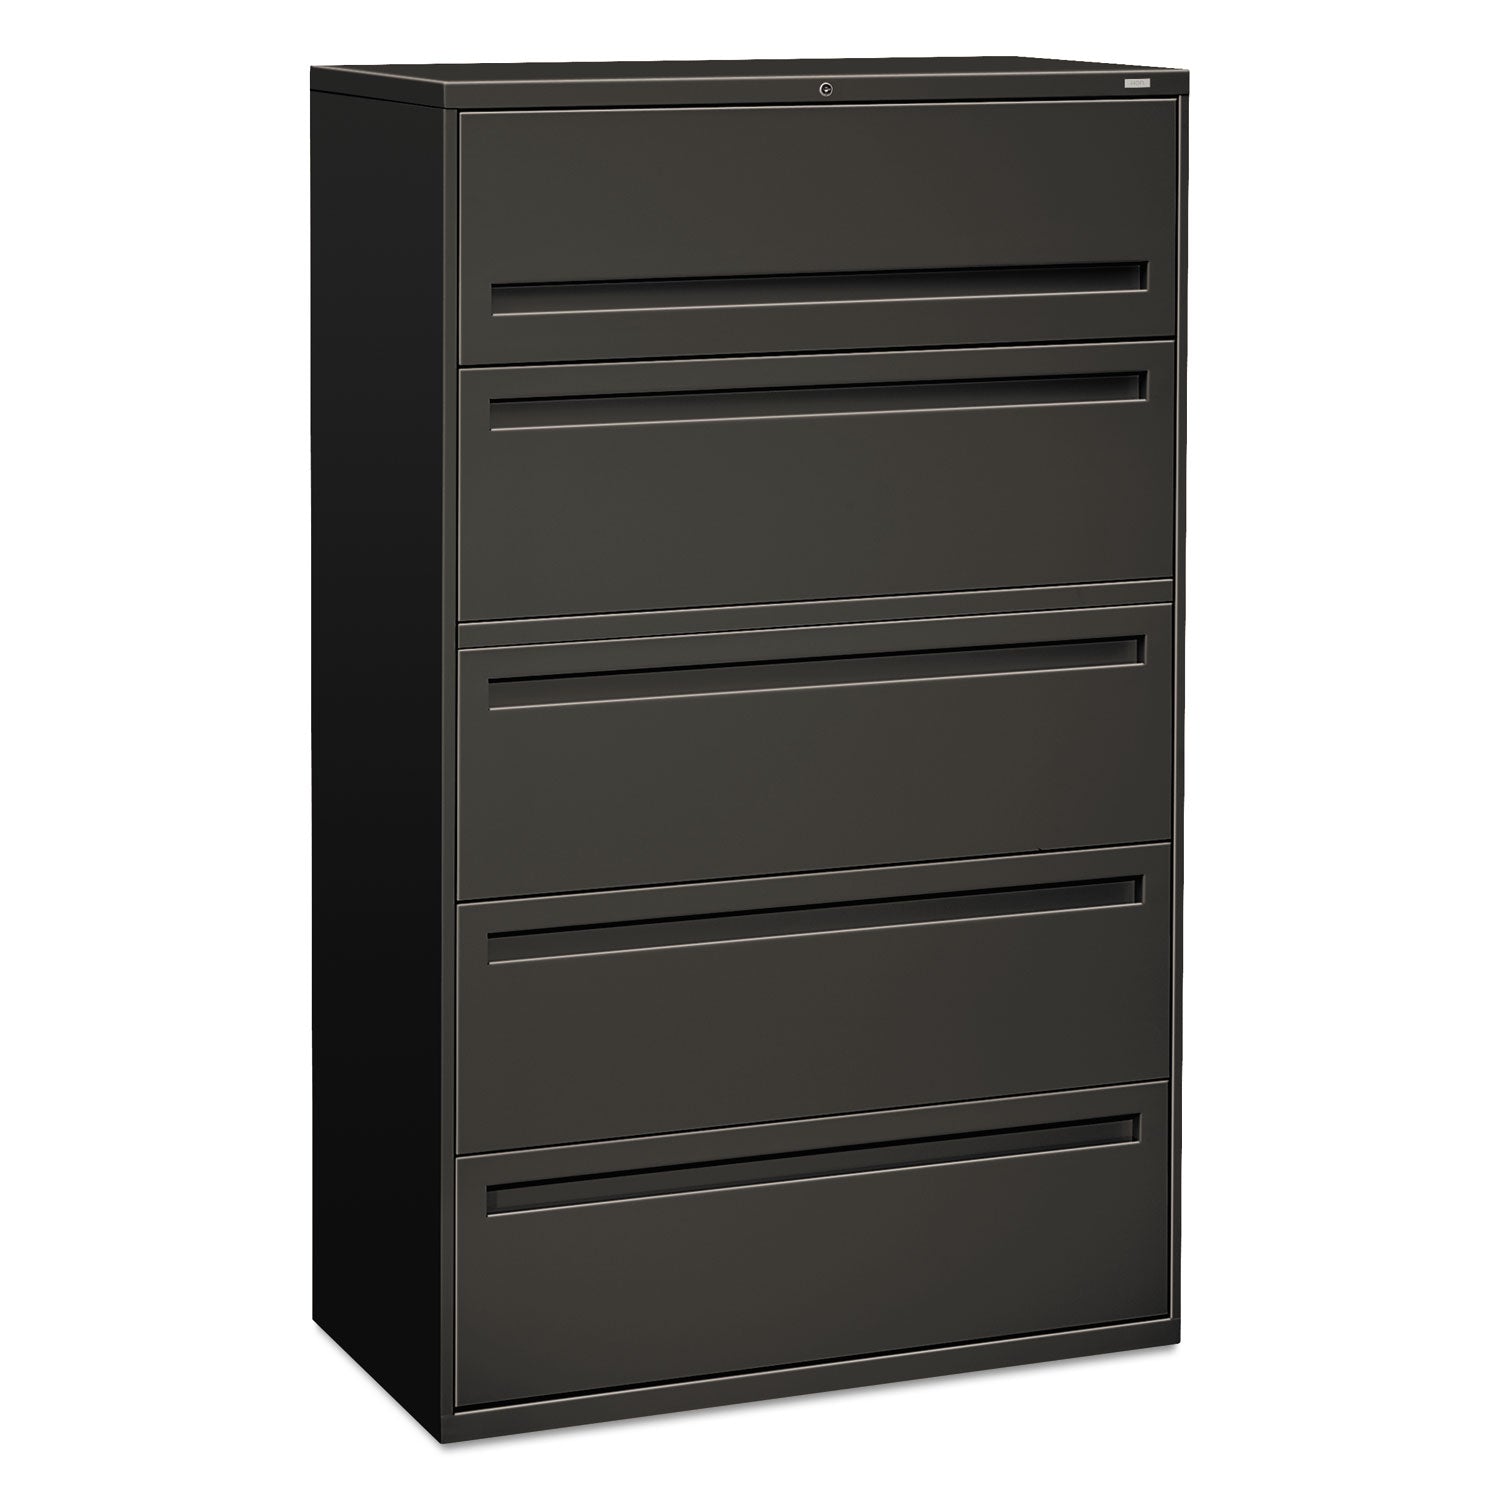 Brigade 700 Series Lateral File, 4 Legal/Letter-Size File Drawers, 1 File Shelf, 1 Post Shelf, Charcoal, 42" x 18" x 64.25 - 